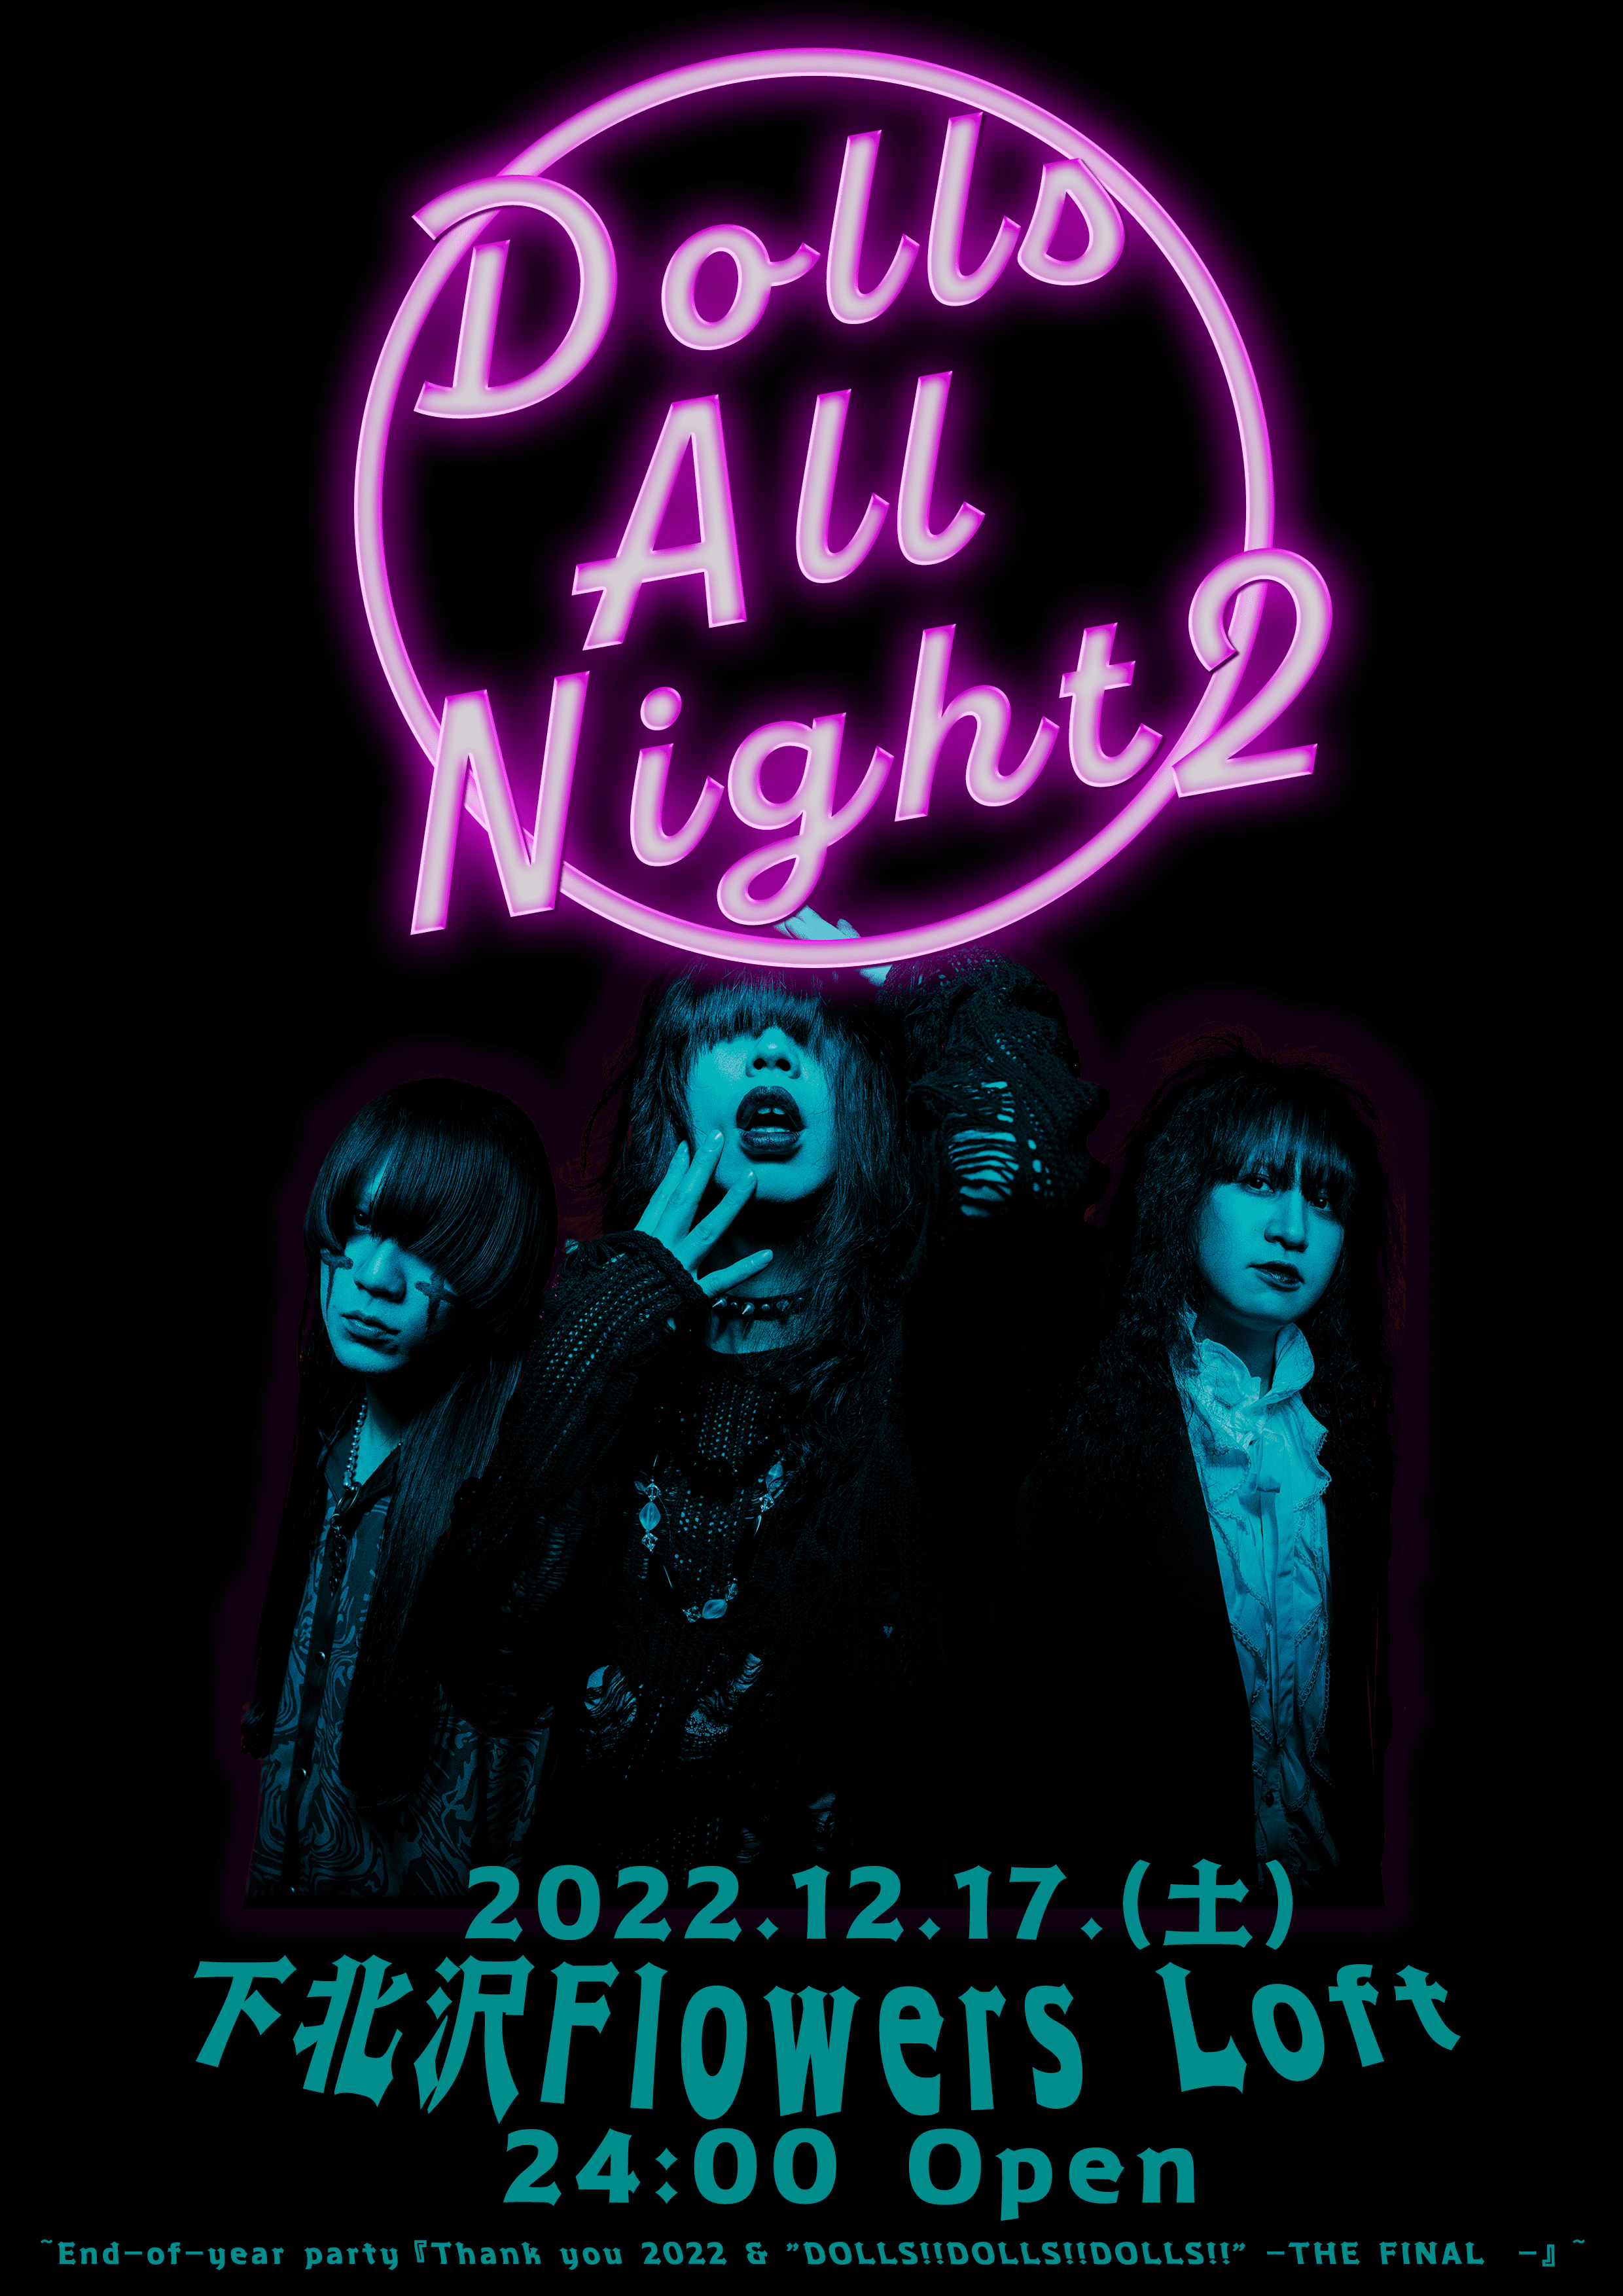 【DOLLS ALL NIGHT2】  ~End-of-year party『Thank you 2022 & "DOLLS!!DOLLS!!DOLLS!!" -THE FINAL”-』~